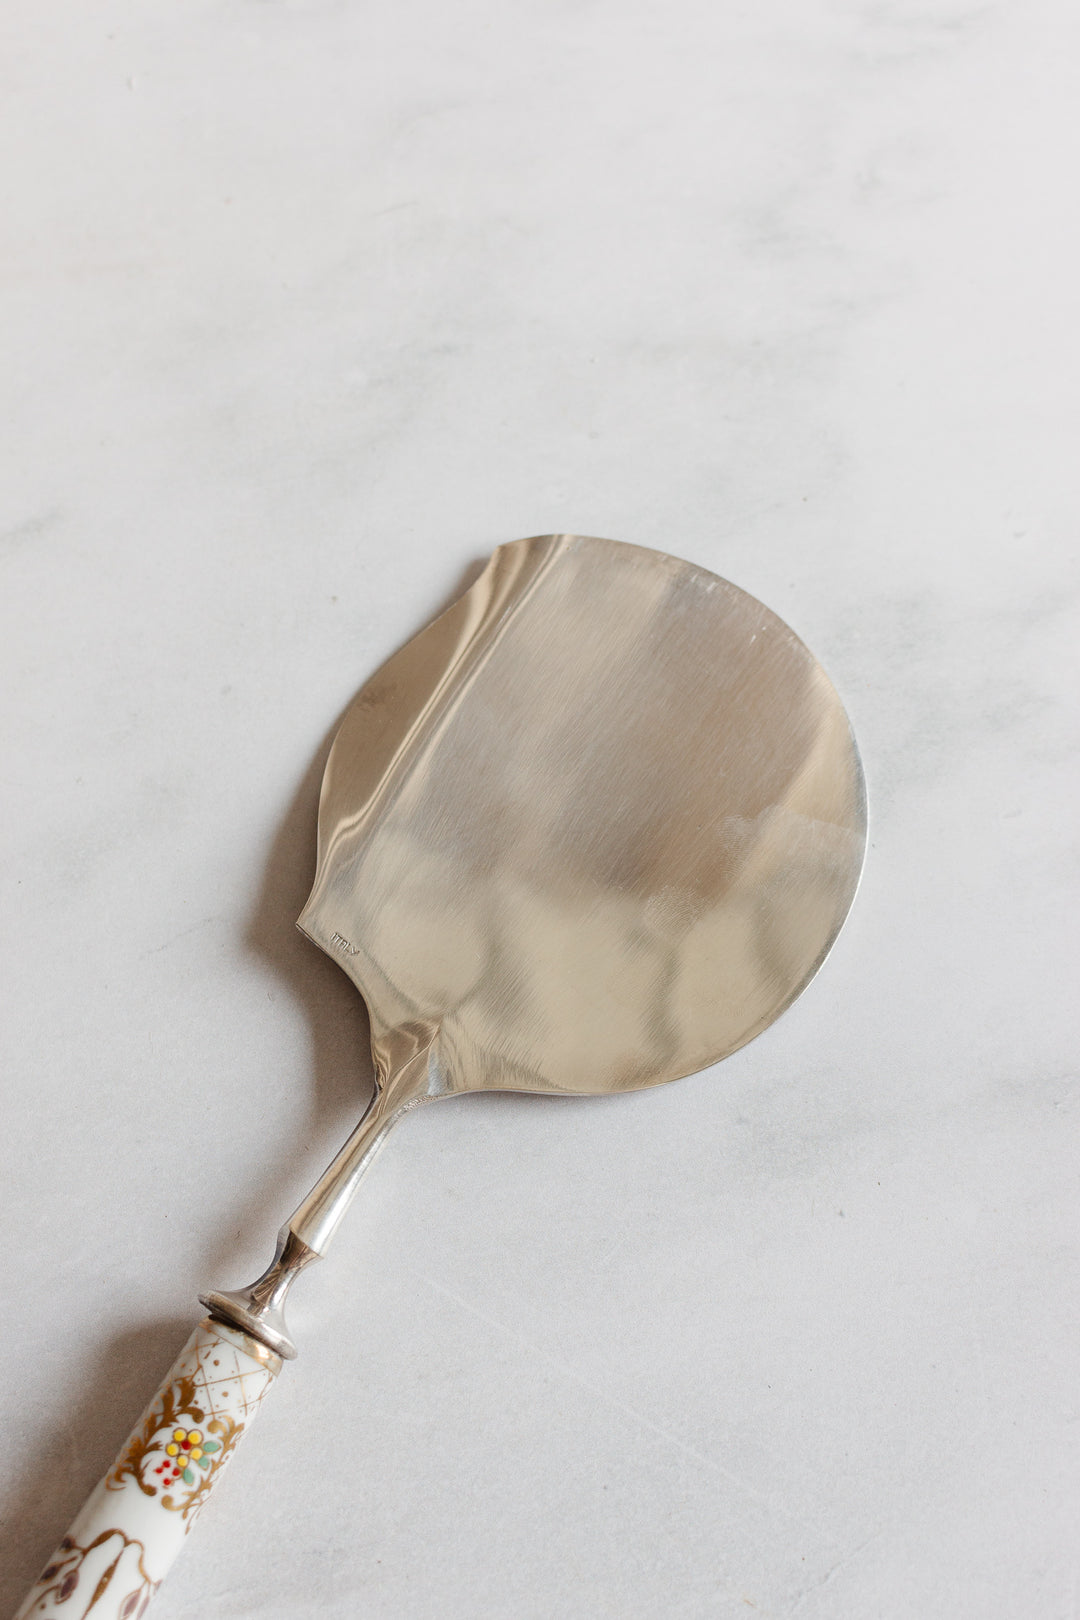 vintage English serving spoon with ceramic handle